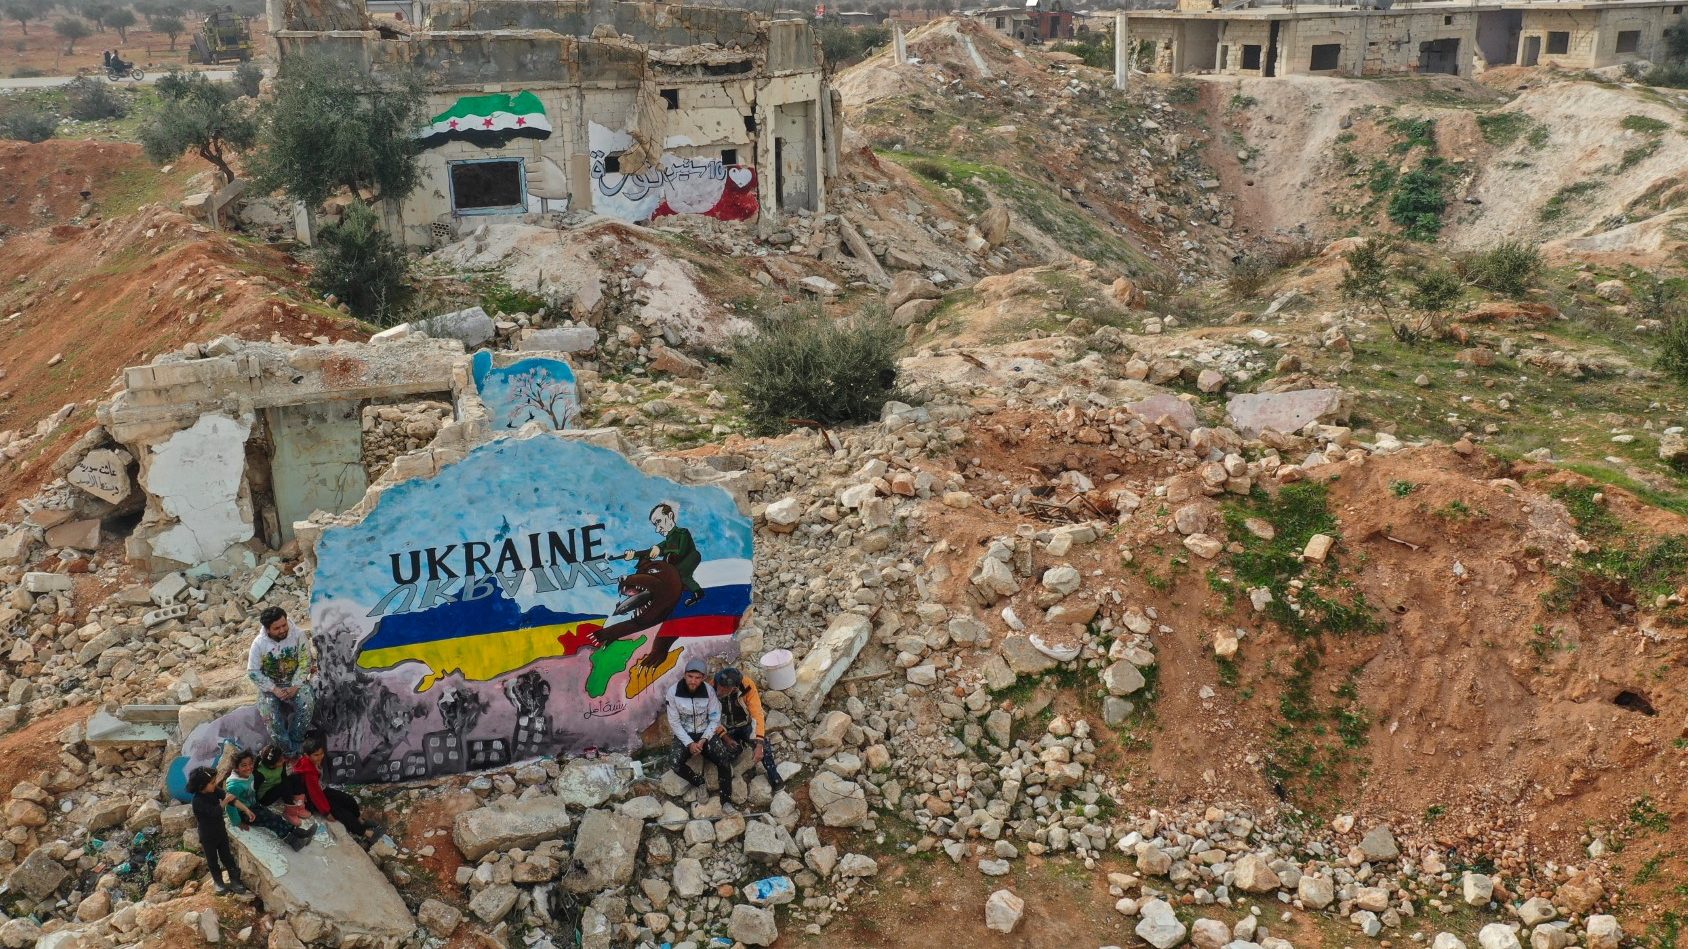 Recap: What Does the Ukraine Invasion Mean for Syria?